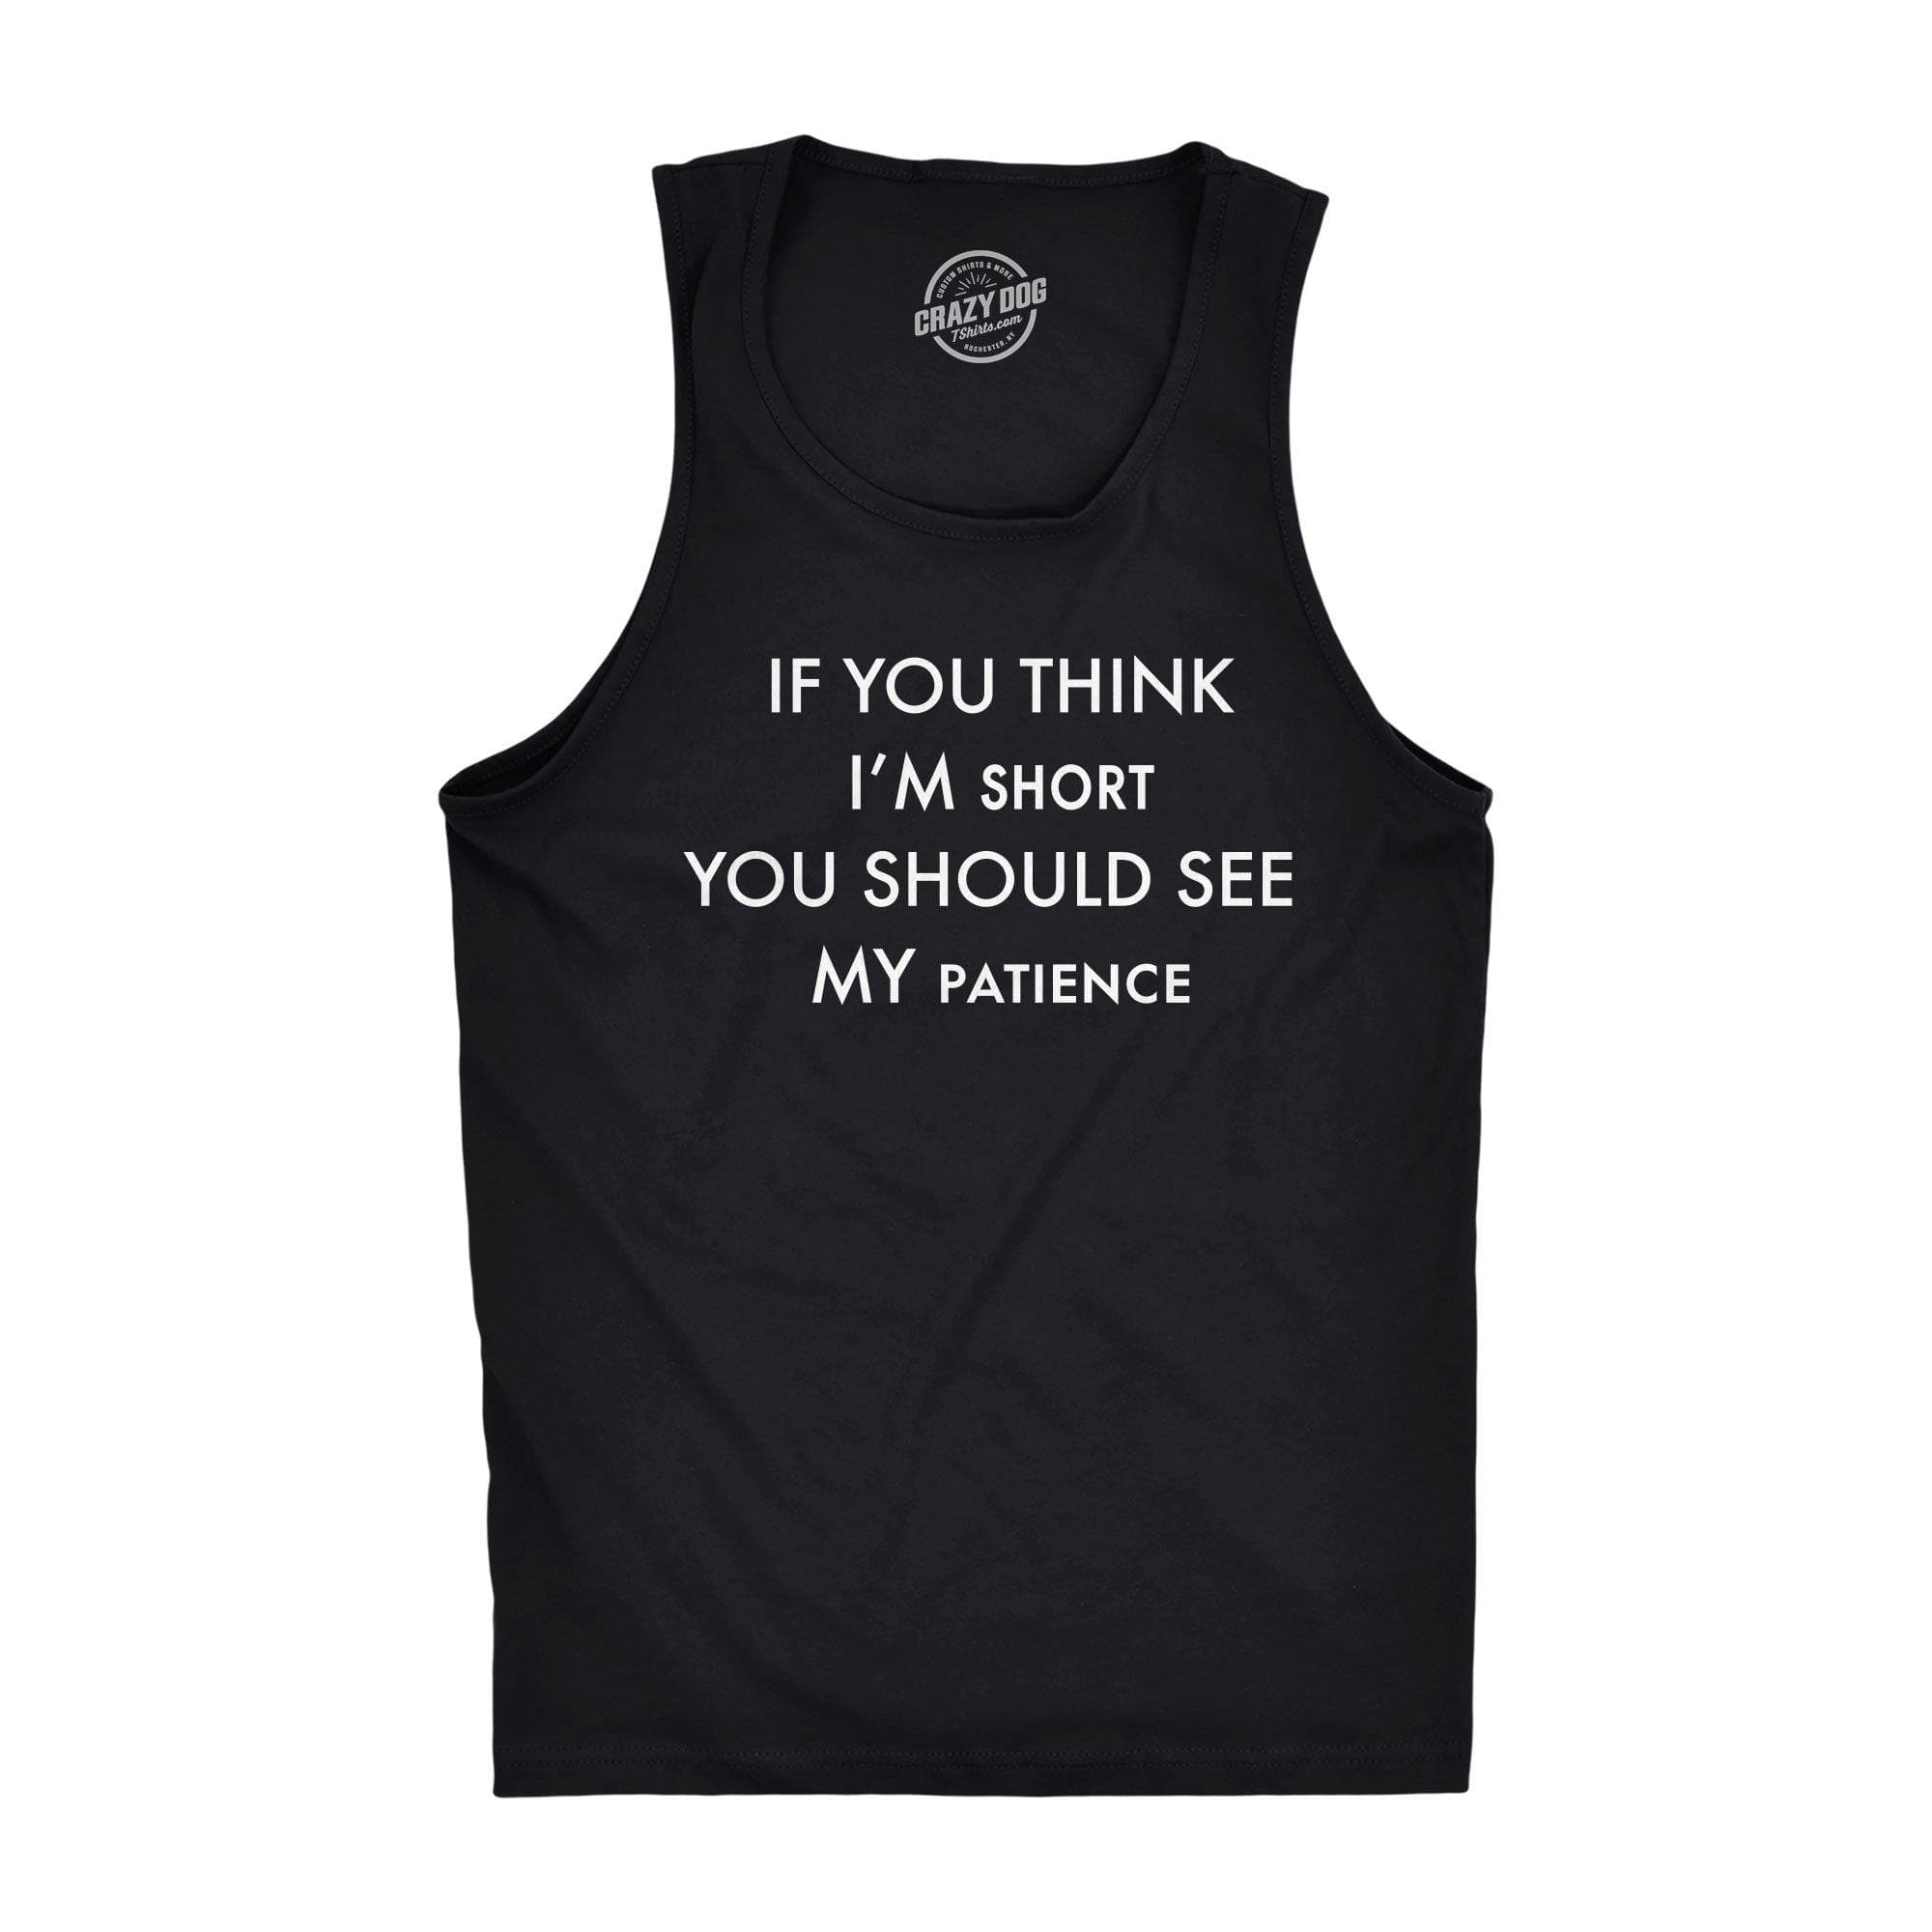 If You Think I'm Short You Should See My Patience Men's Tank Top - Crazy Dog T-Shirts